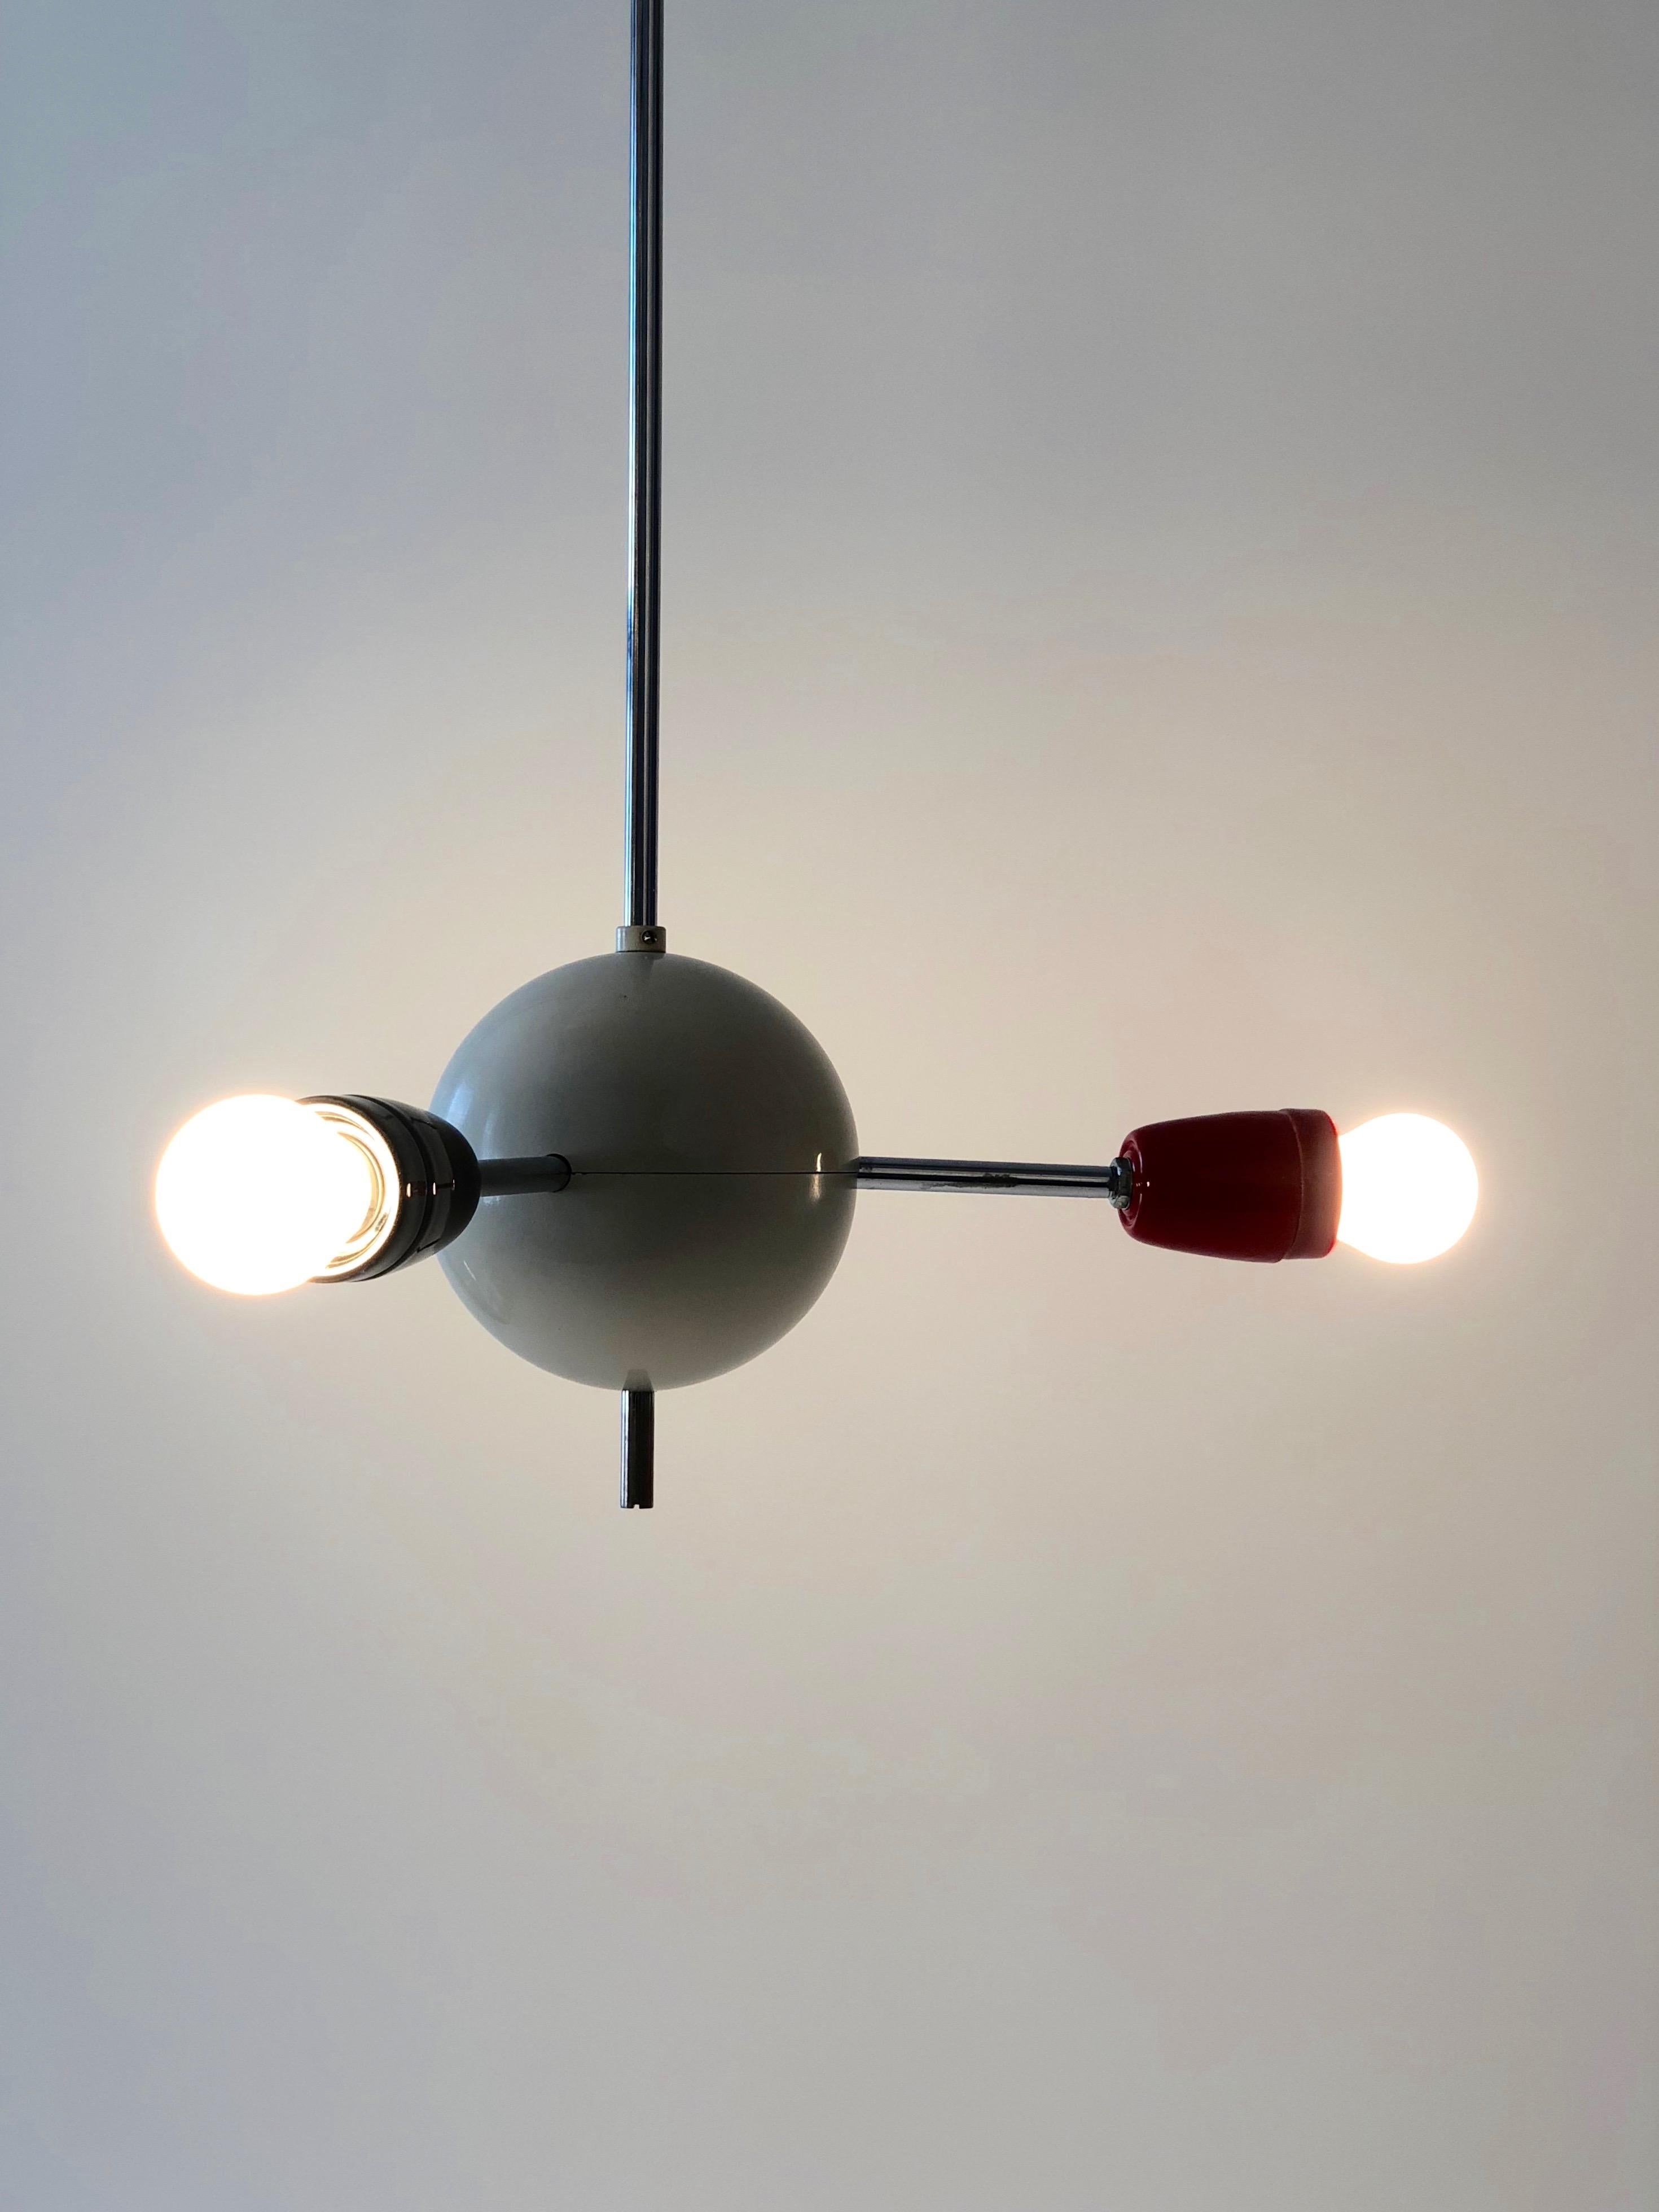 1960s Sputnik from the Czech Republic with Colored Sockets For Sale 4